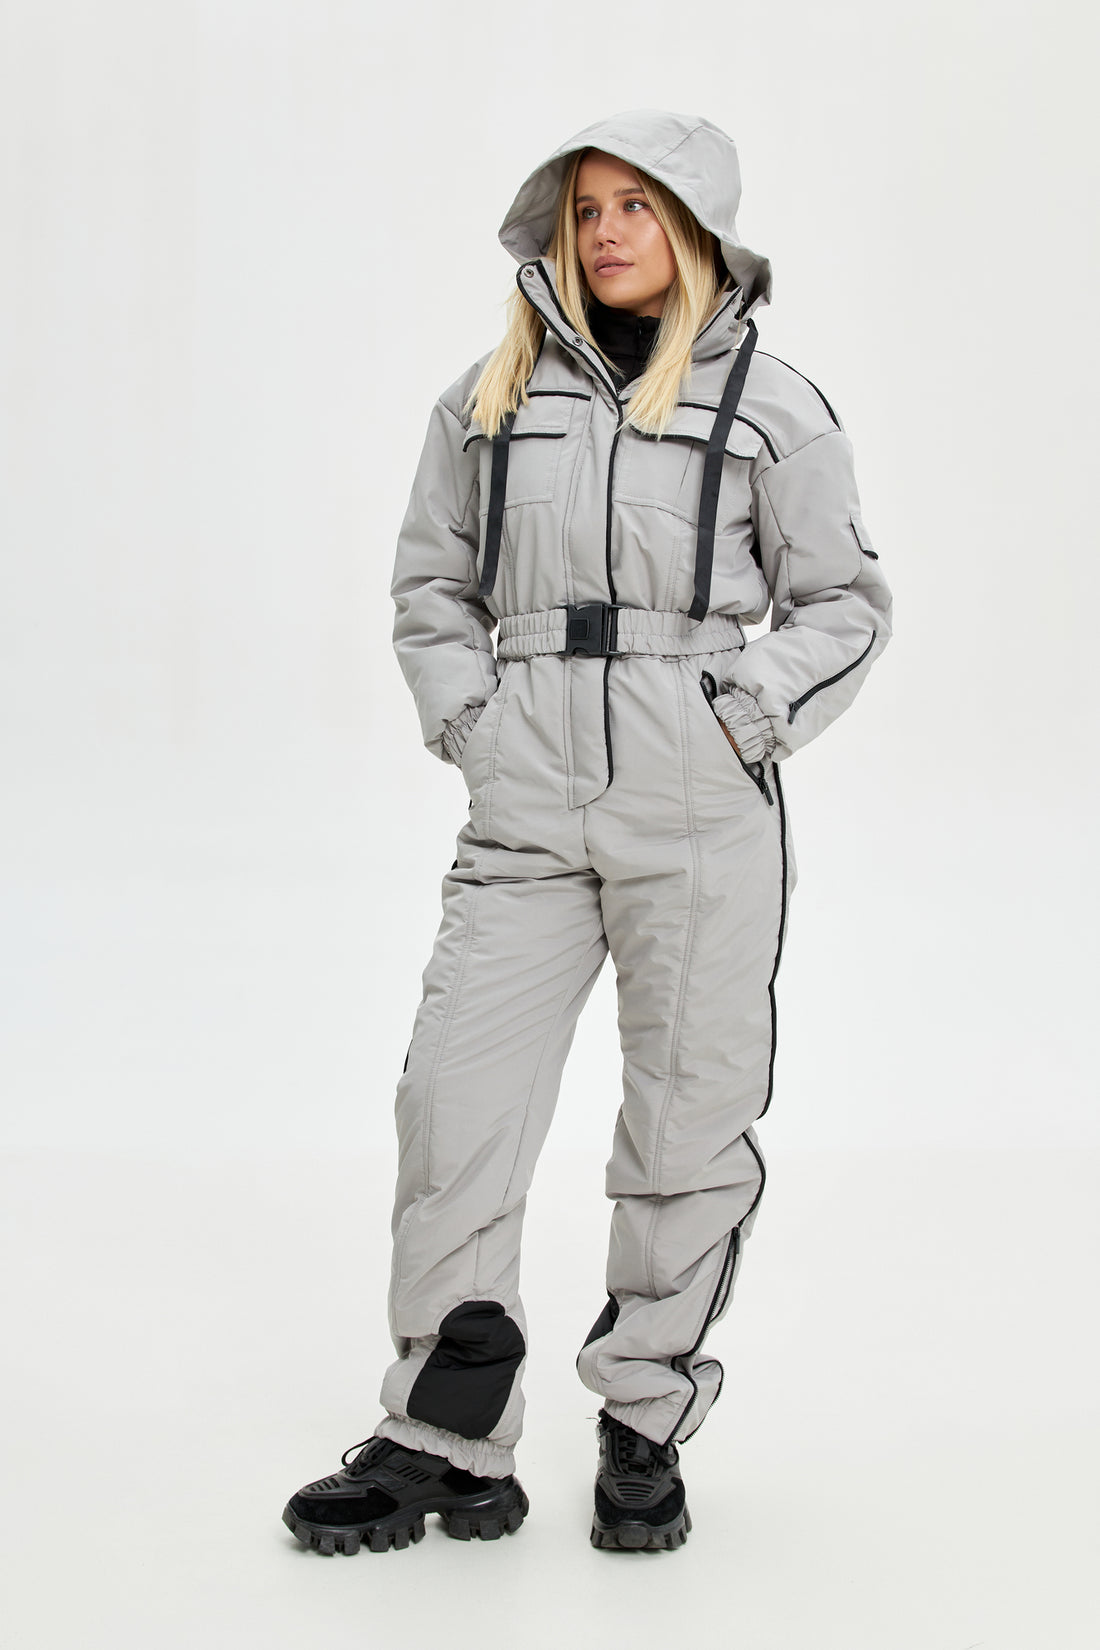 Gray ski suit BLANC - GRAY with black edging - Womens ski jacket with ski pants one piece outfit